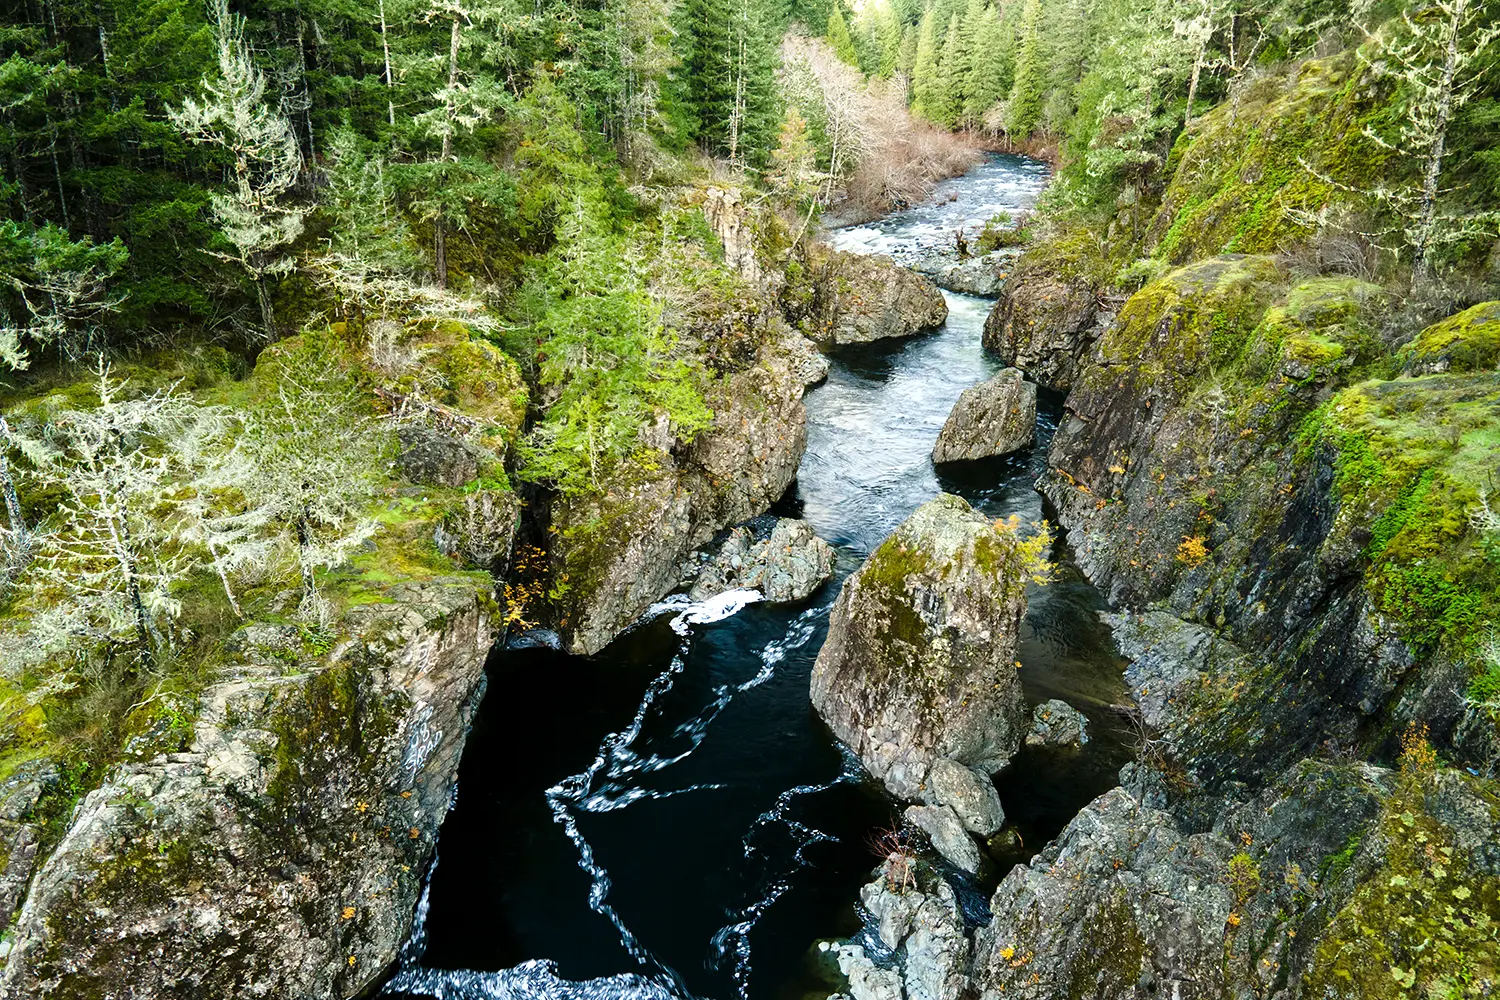 A river surrounded by rocks and trees in Sooke Potholes Provincial Park, Vancouver Island